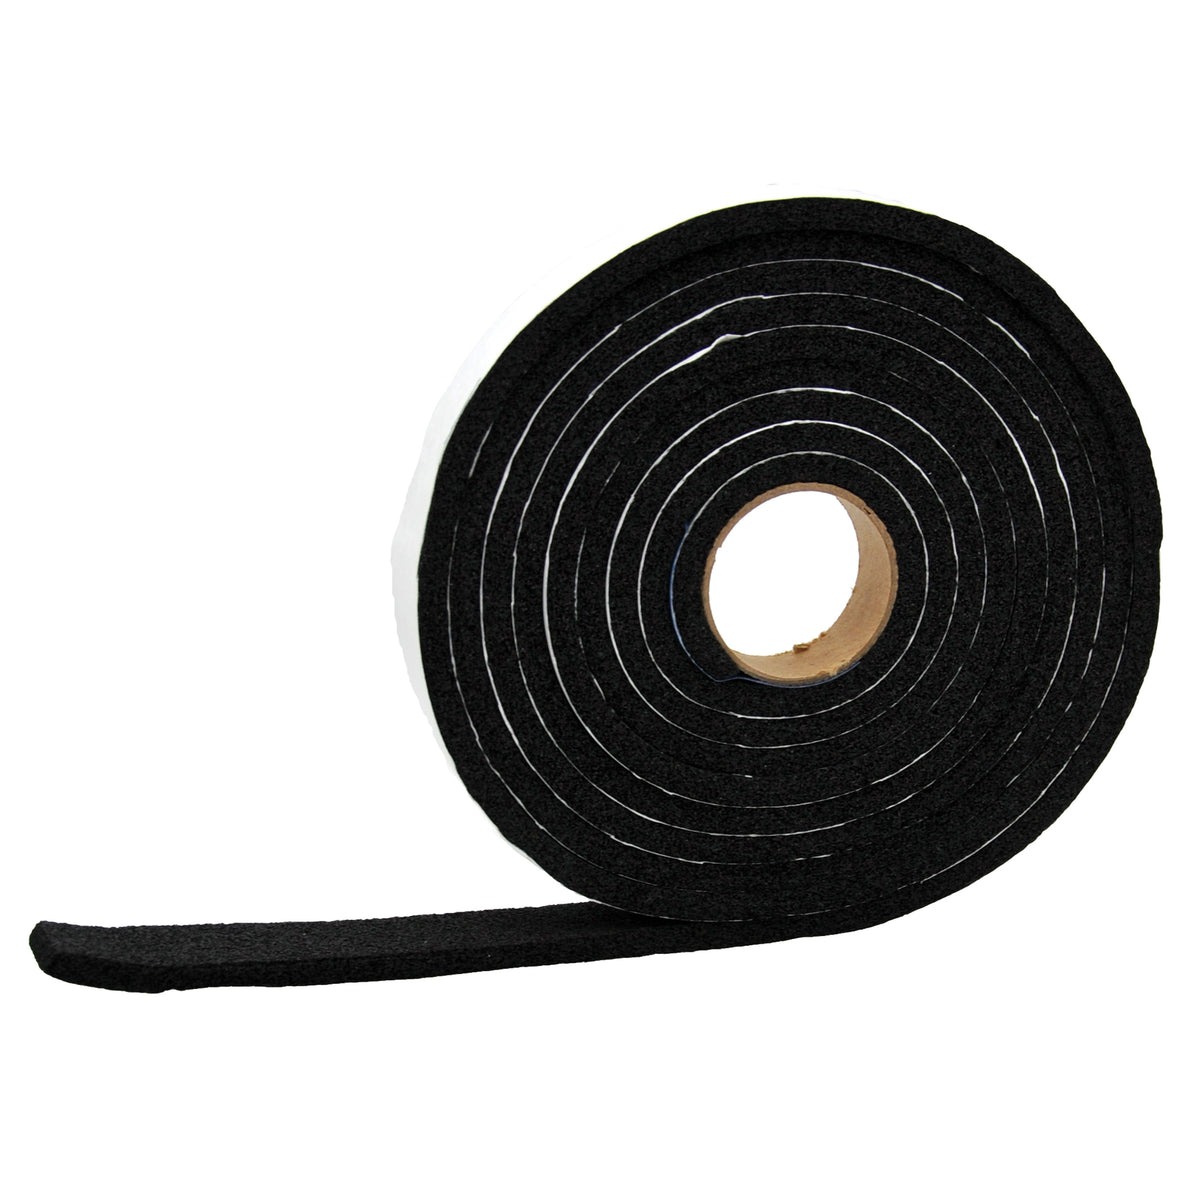 AP Products 018-383410 Weather Stripping - 3/8" x 3/4" x 50'